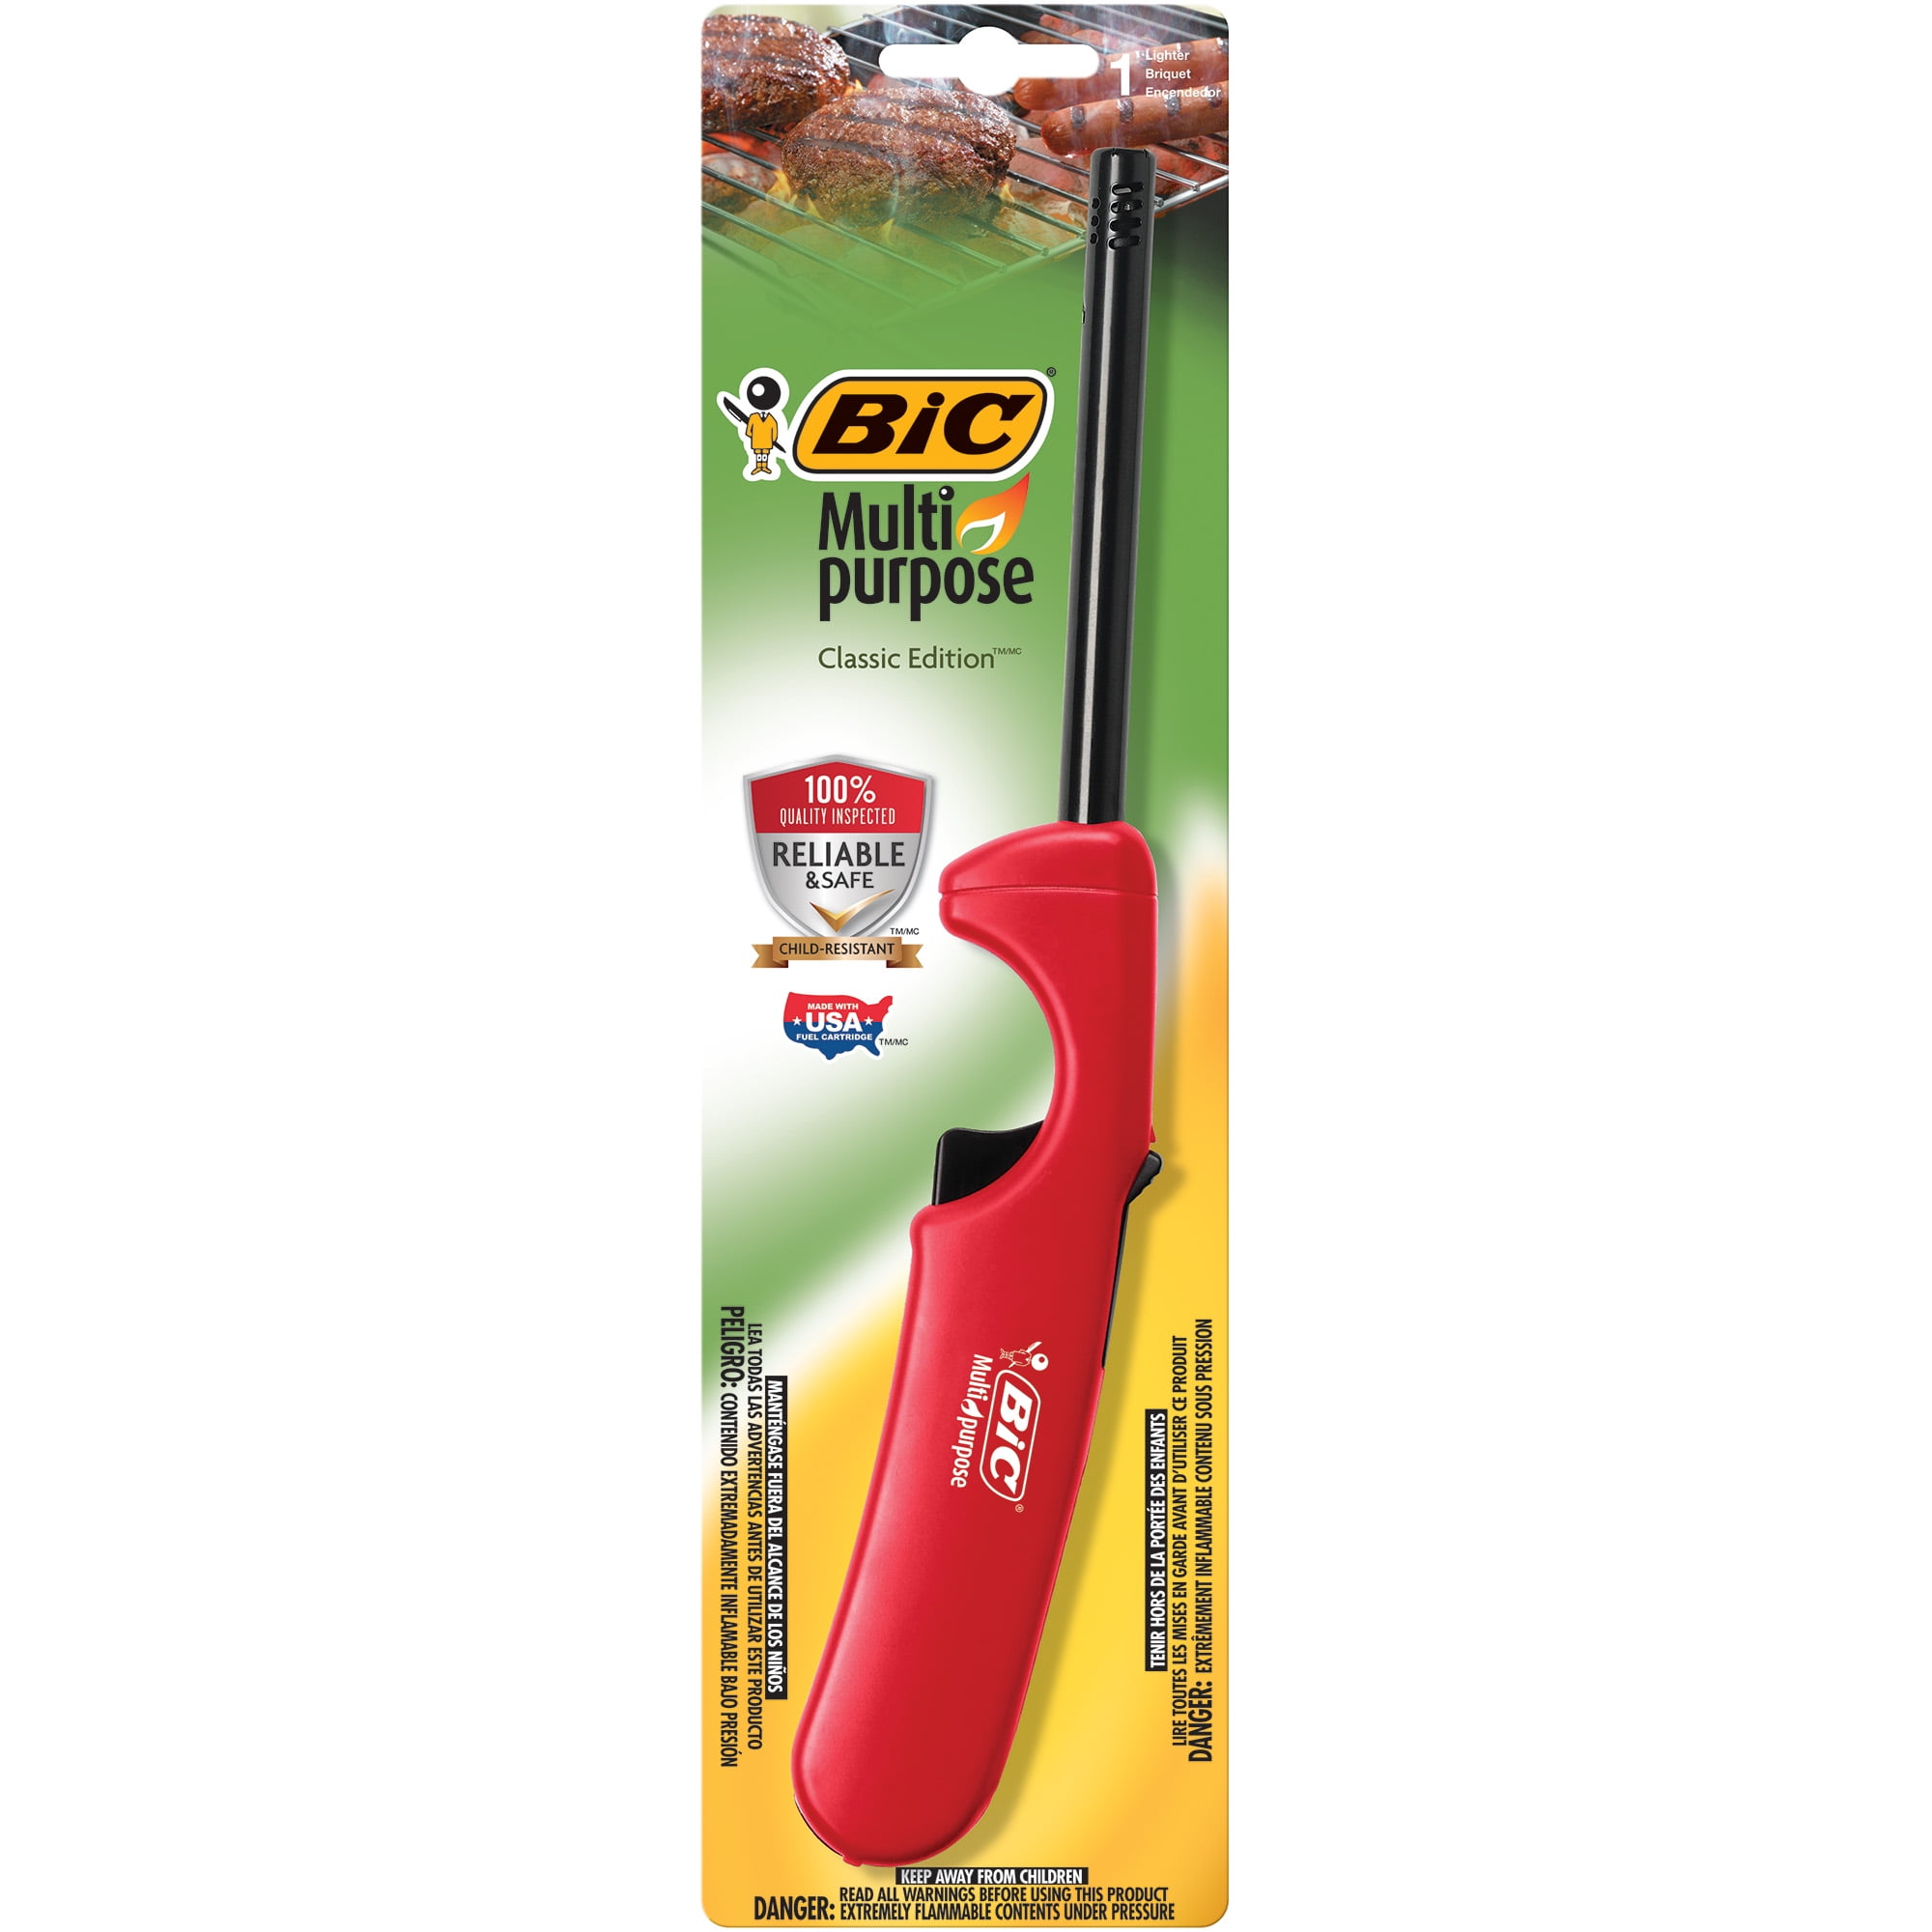 BIC Multi-Purpose Lighters, Classic Edition, 1 Count (colors may vary)